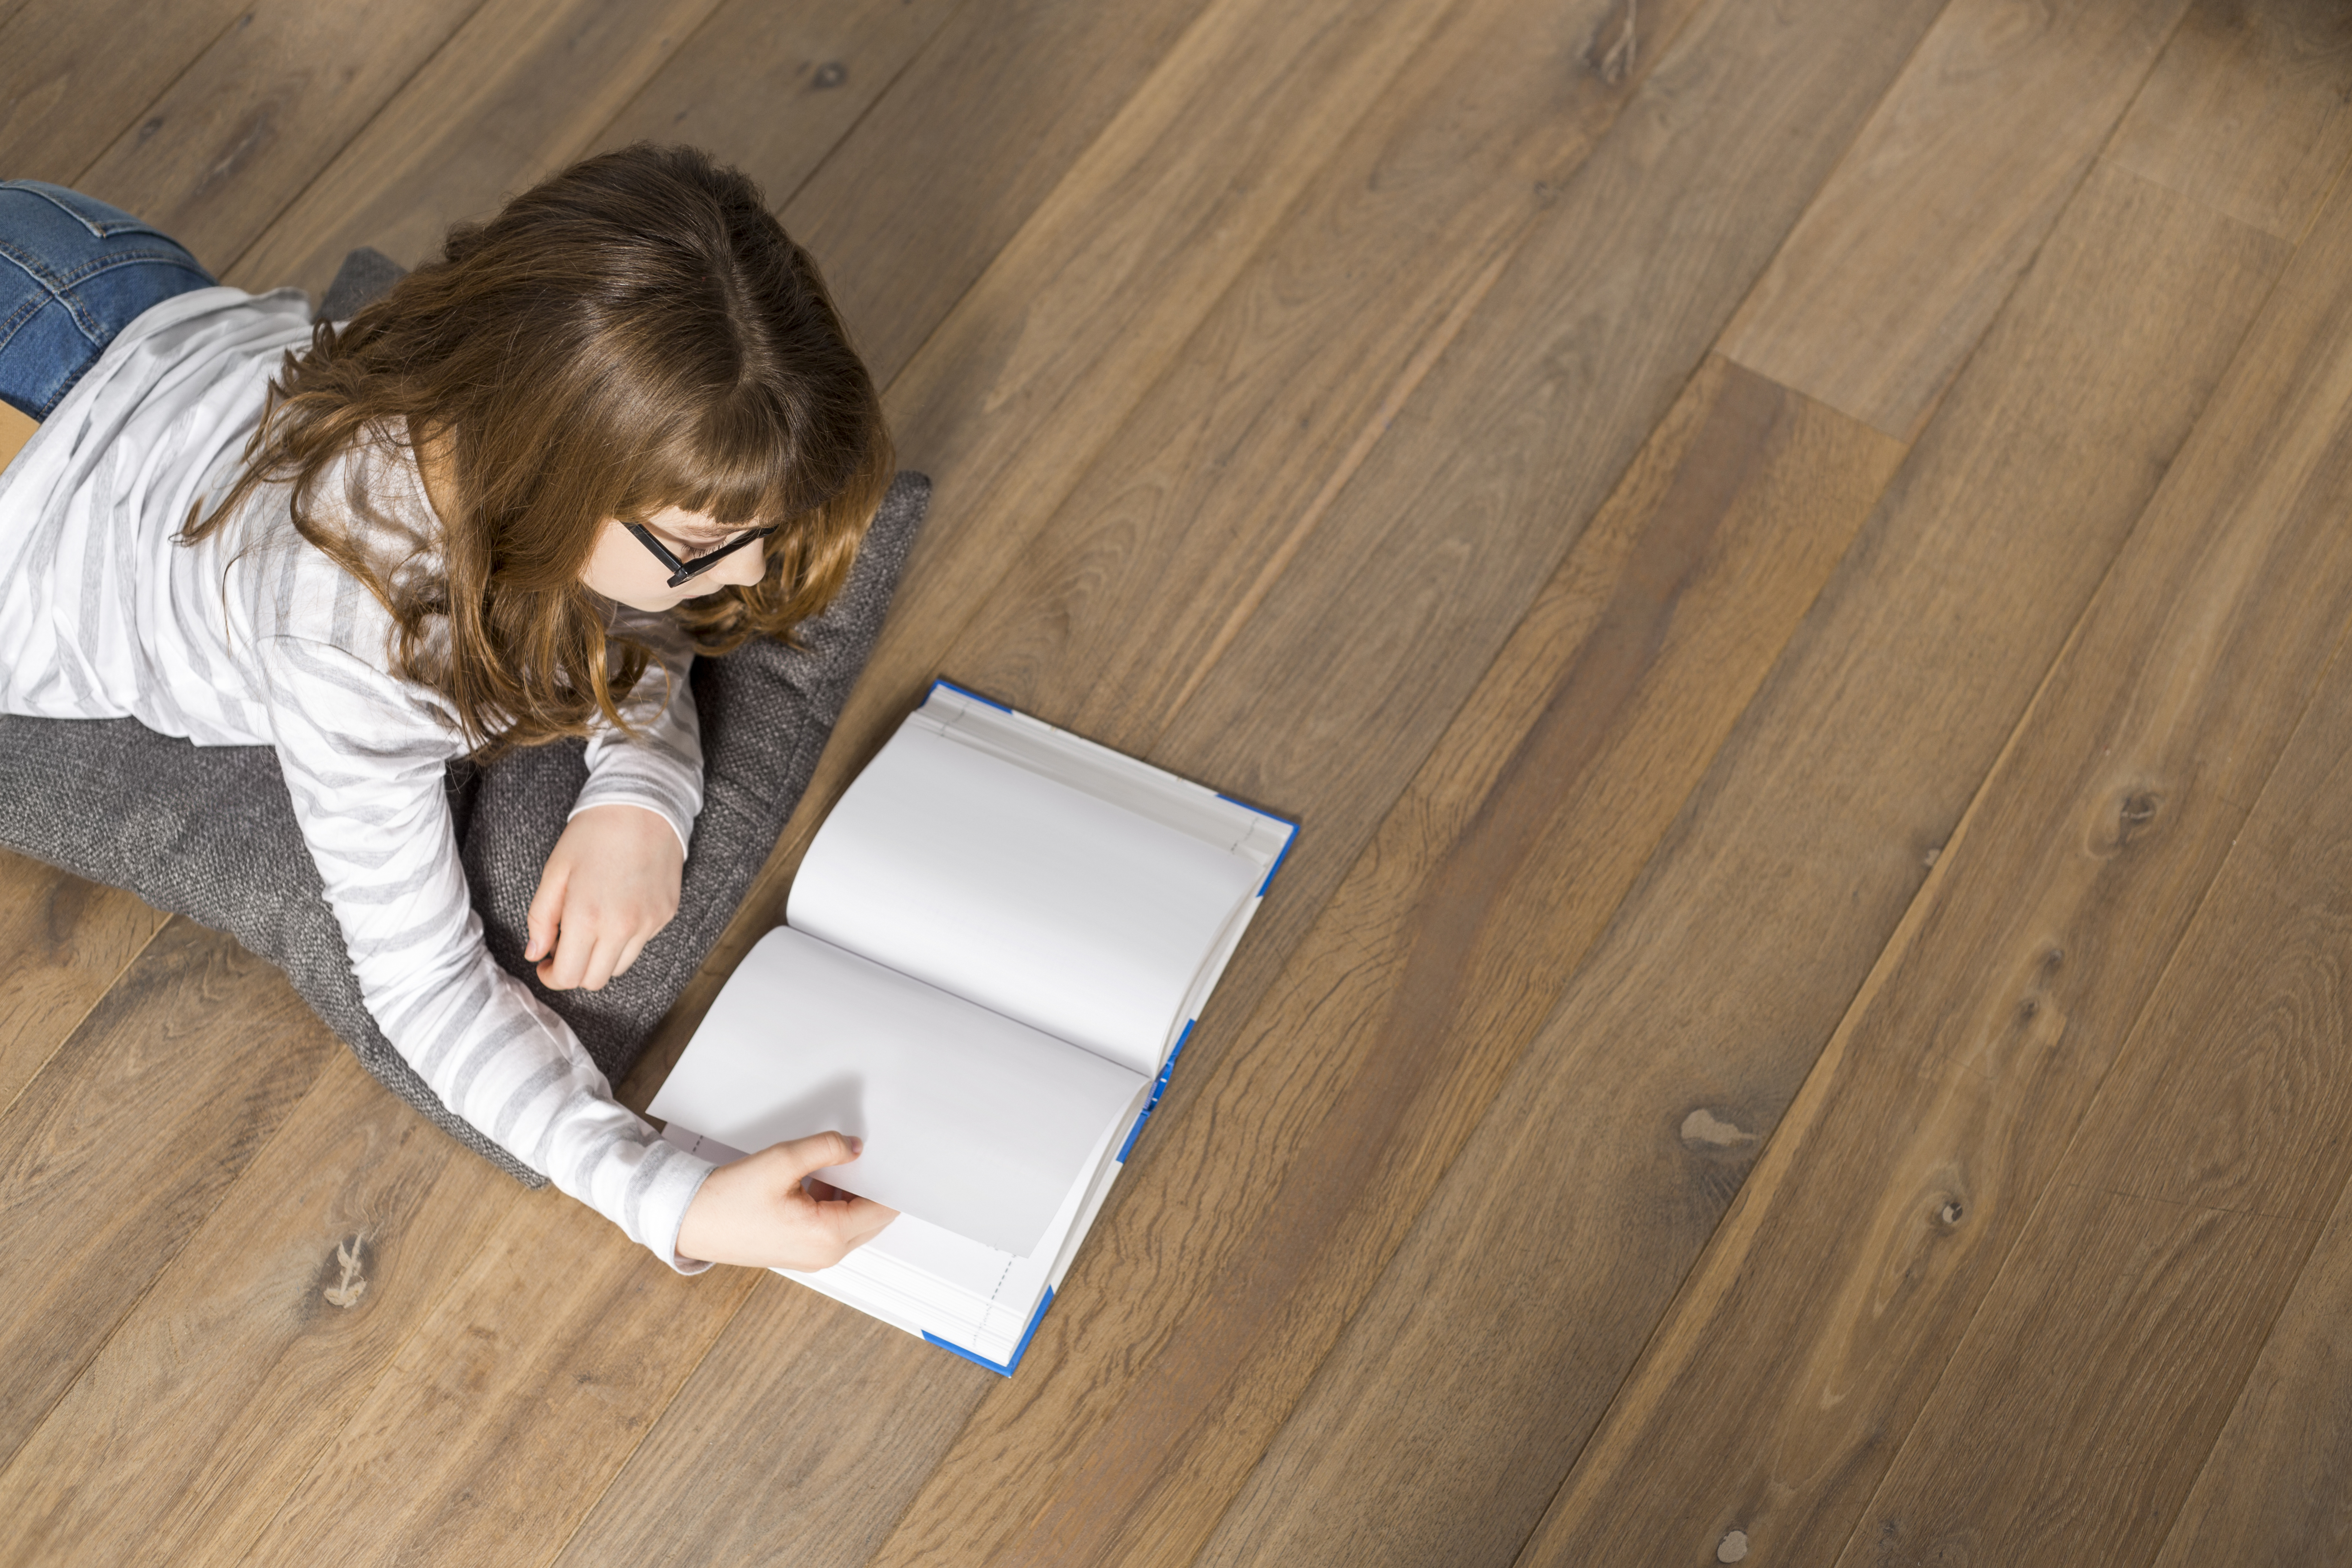 Hardwood Species Featured Image of a Child Reading on a Hardwood Floor